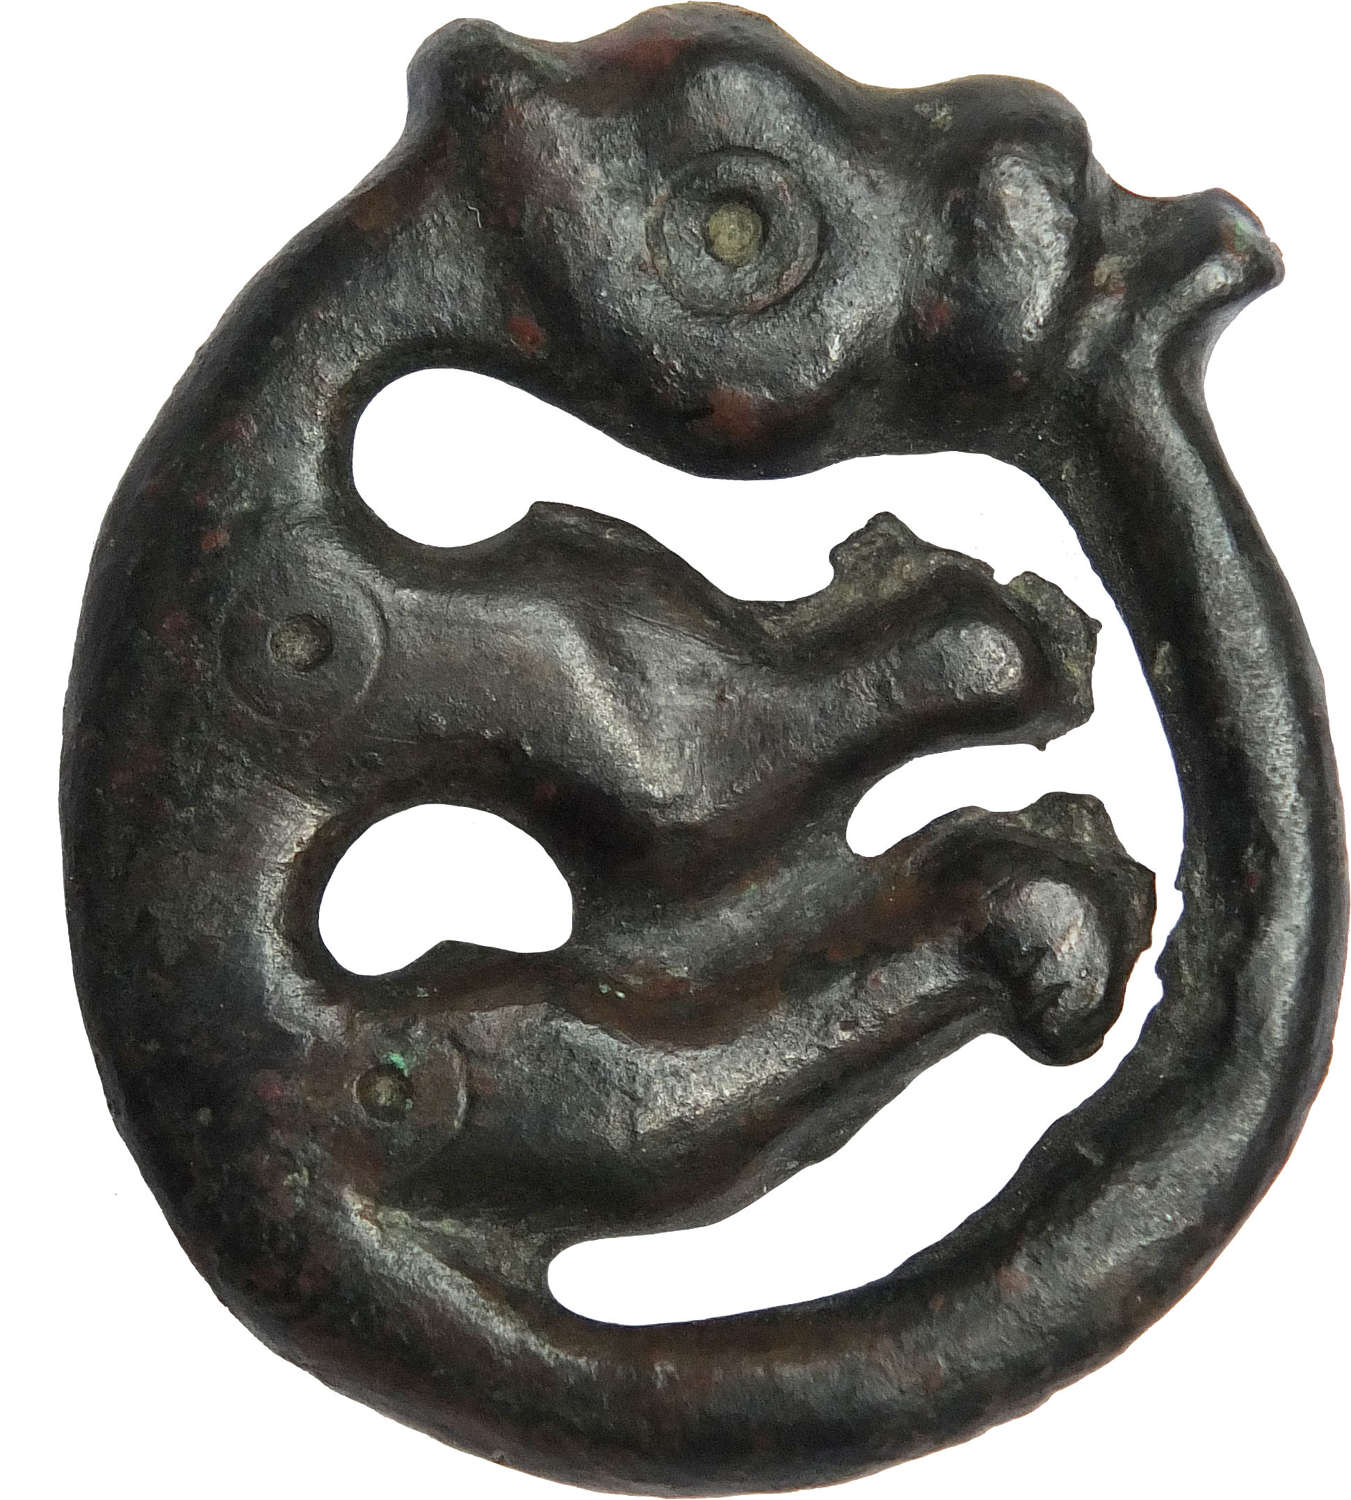 A Scythian bronze attachment, ex collection of Oliver Hoare